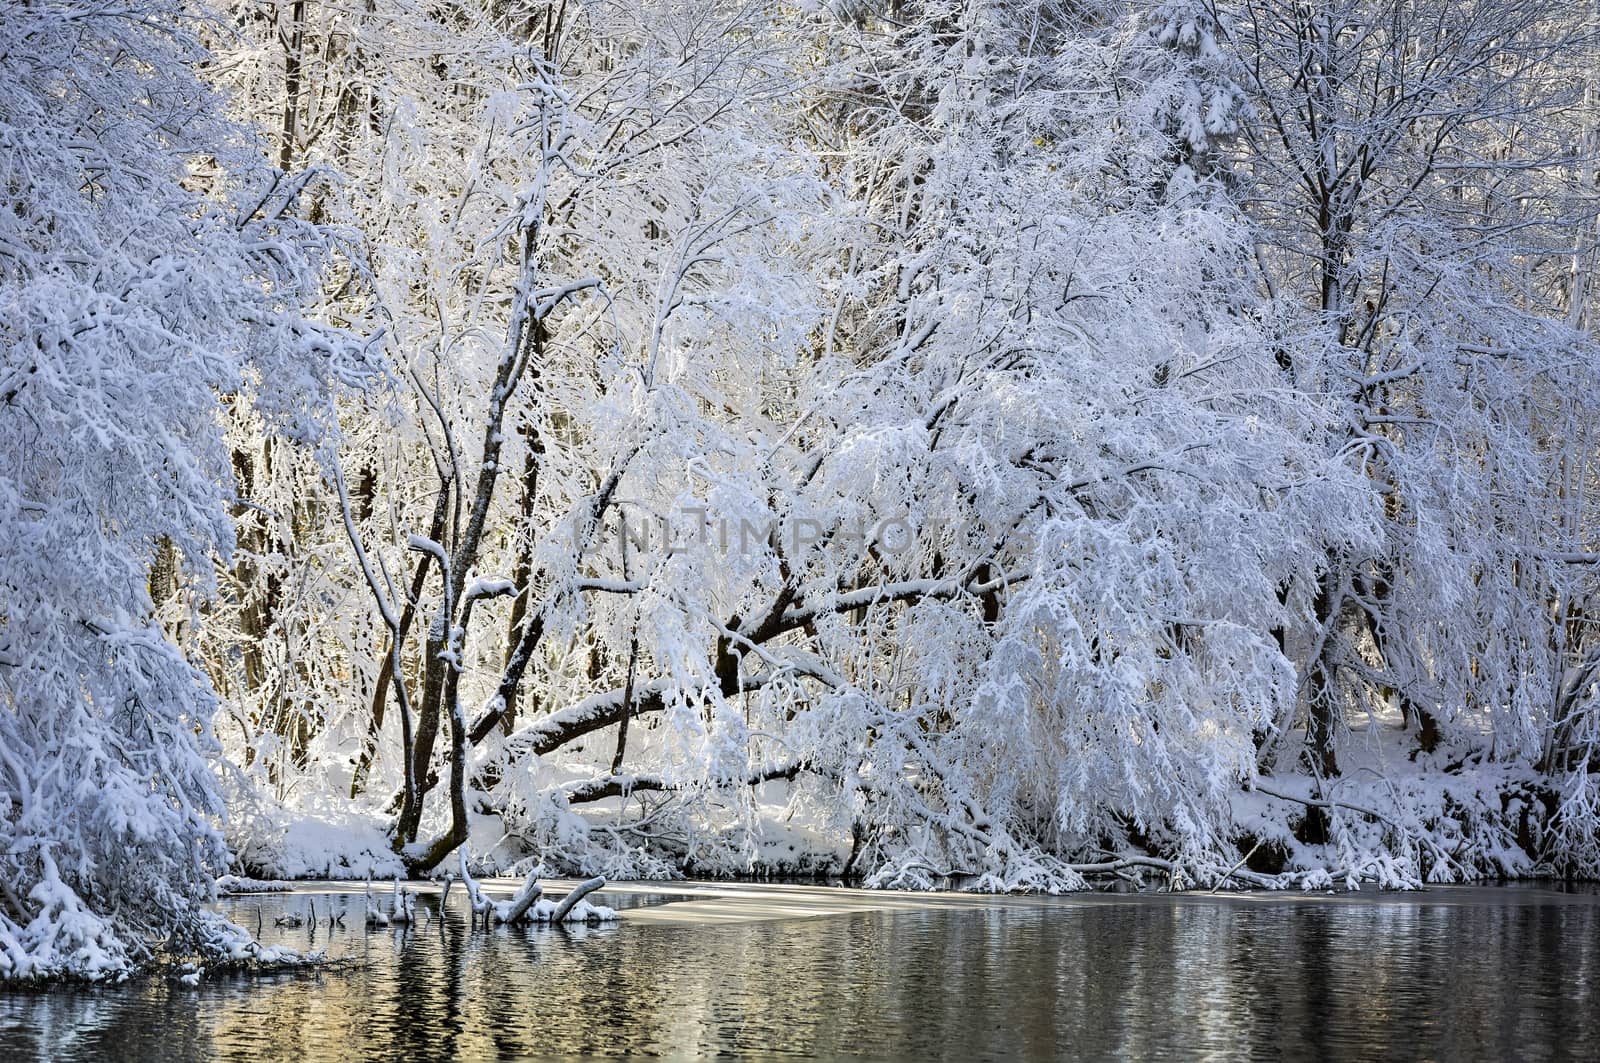 A lake hidden within the snowy winter forest.